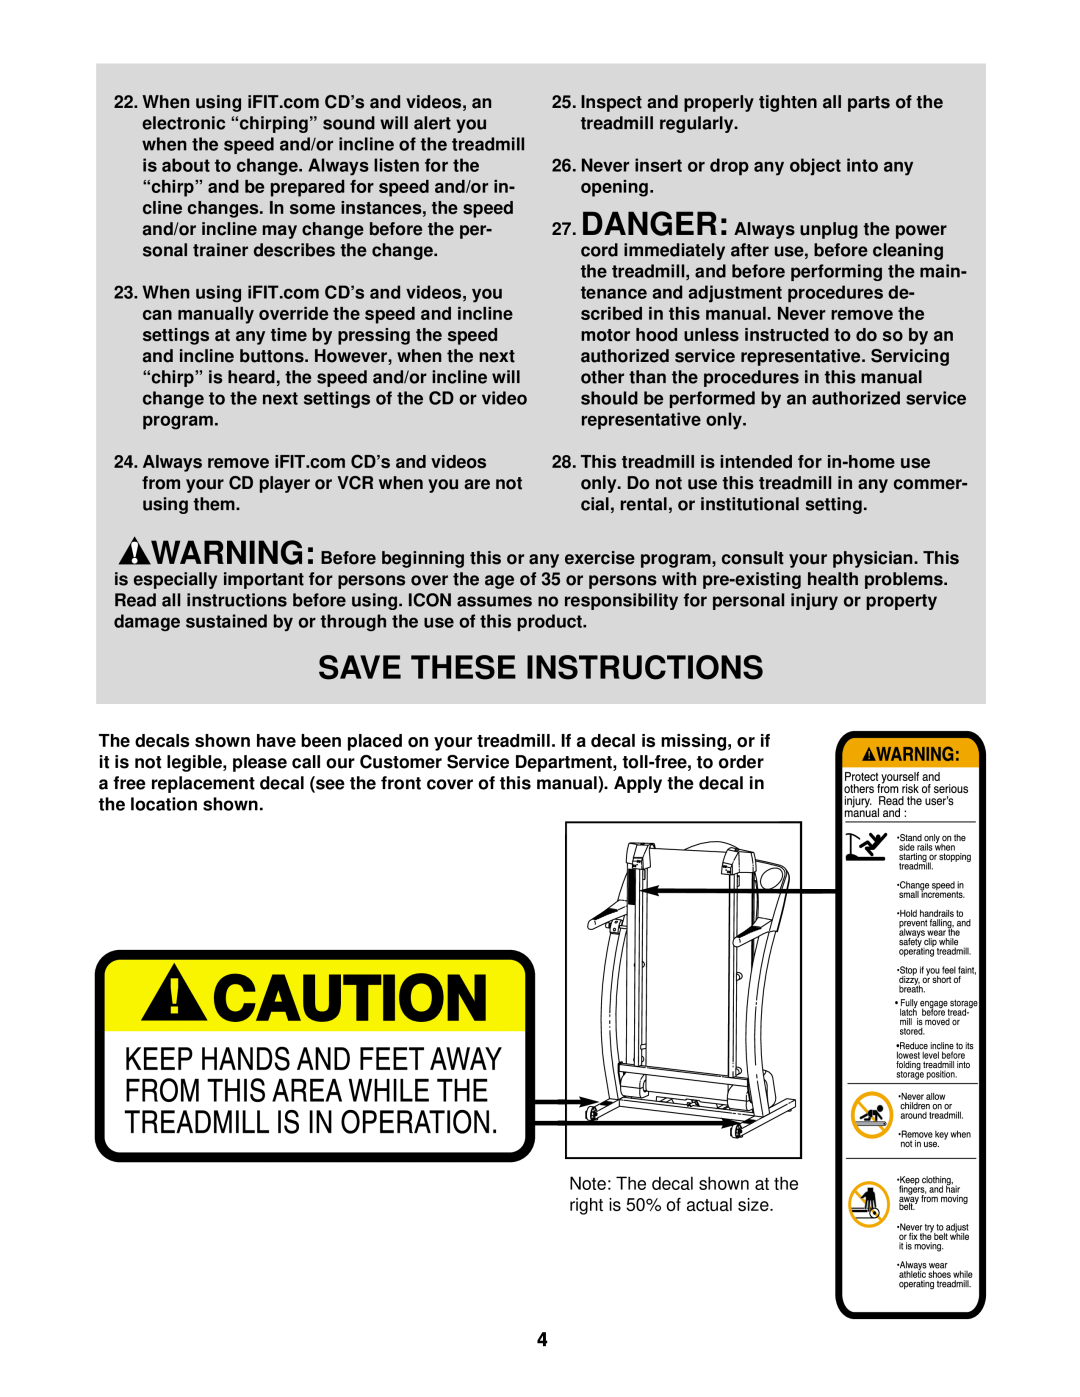 ProForm PFTL59121 user manual Save These Instructions, Inspect and properly tighten all parts of the treadmill regularly 